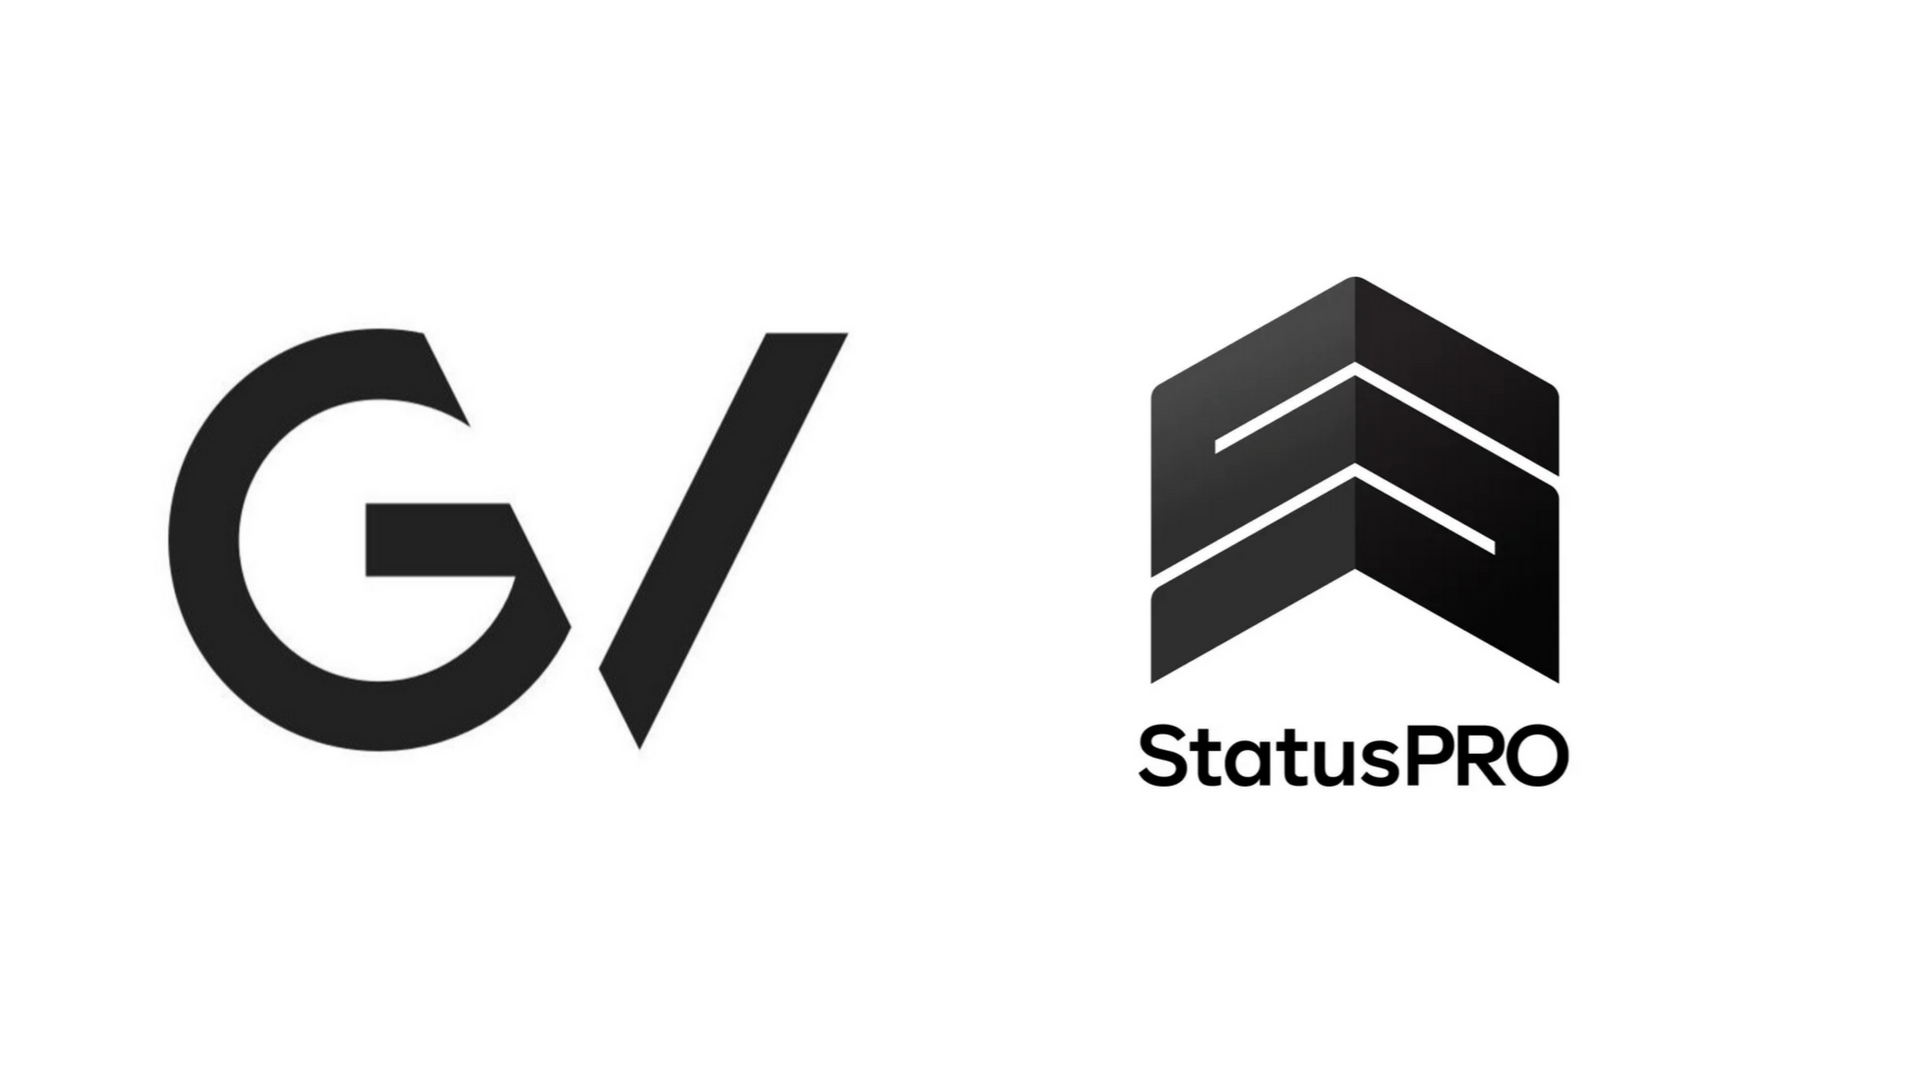 StatusPro Secures $20 Million in Series A Funding, Spearheaded by GV (Google Ventures), to Innovate and Transform Sports with XR Technology